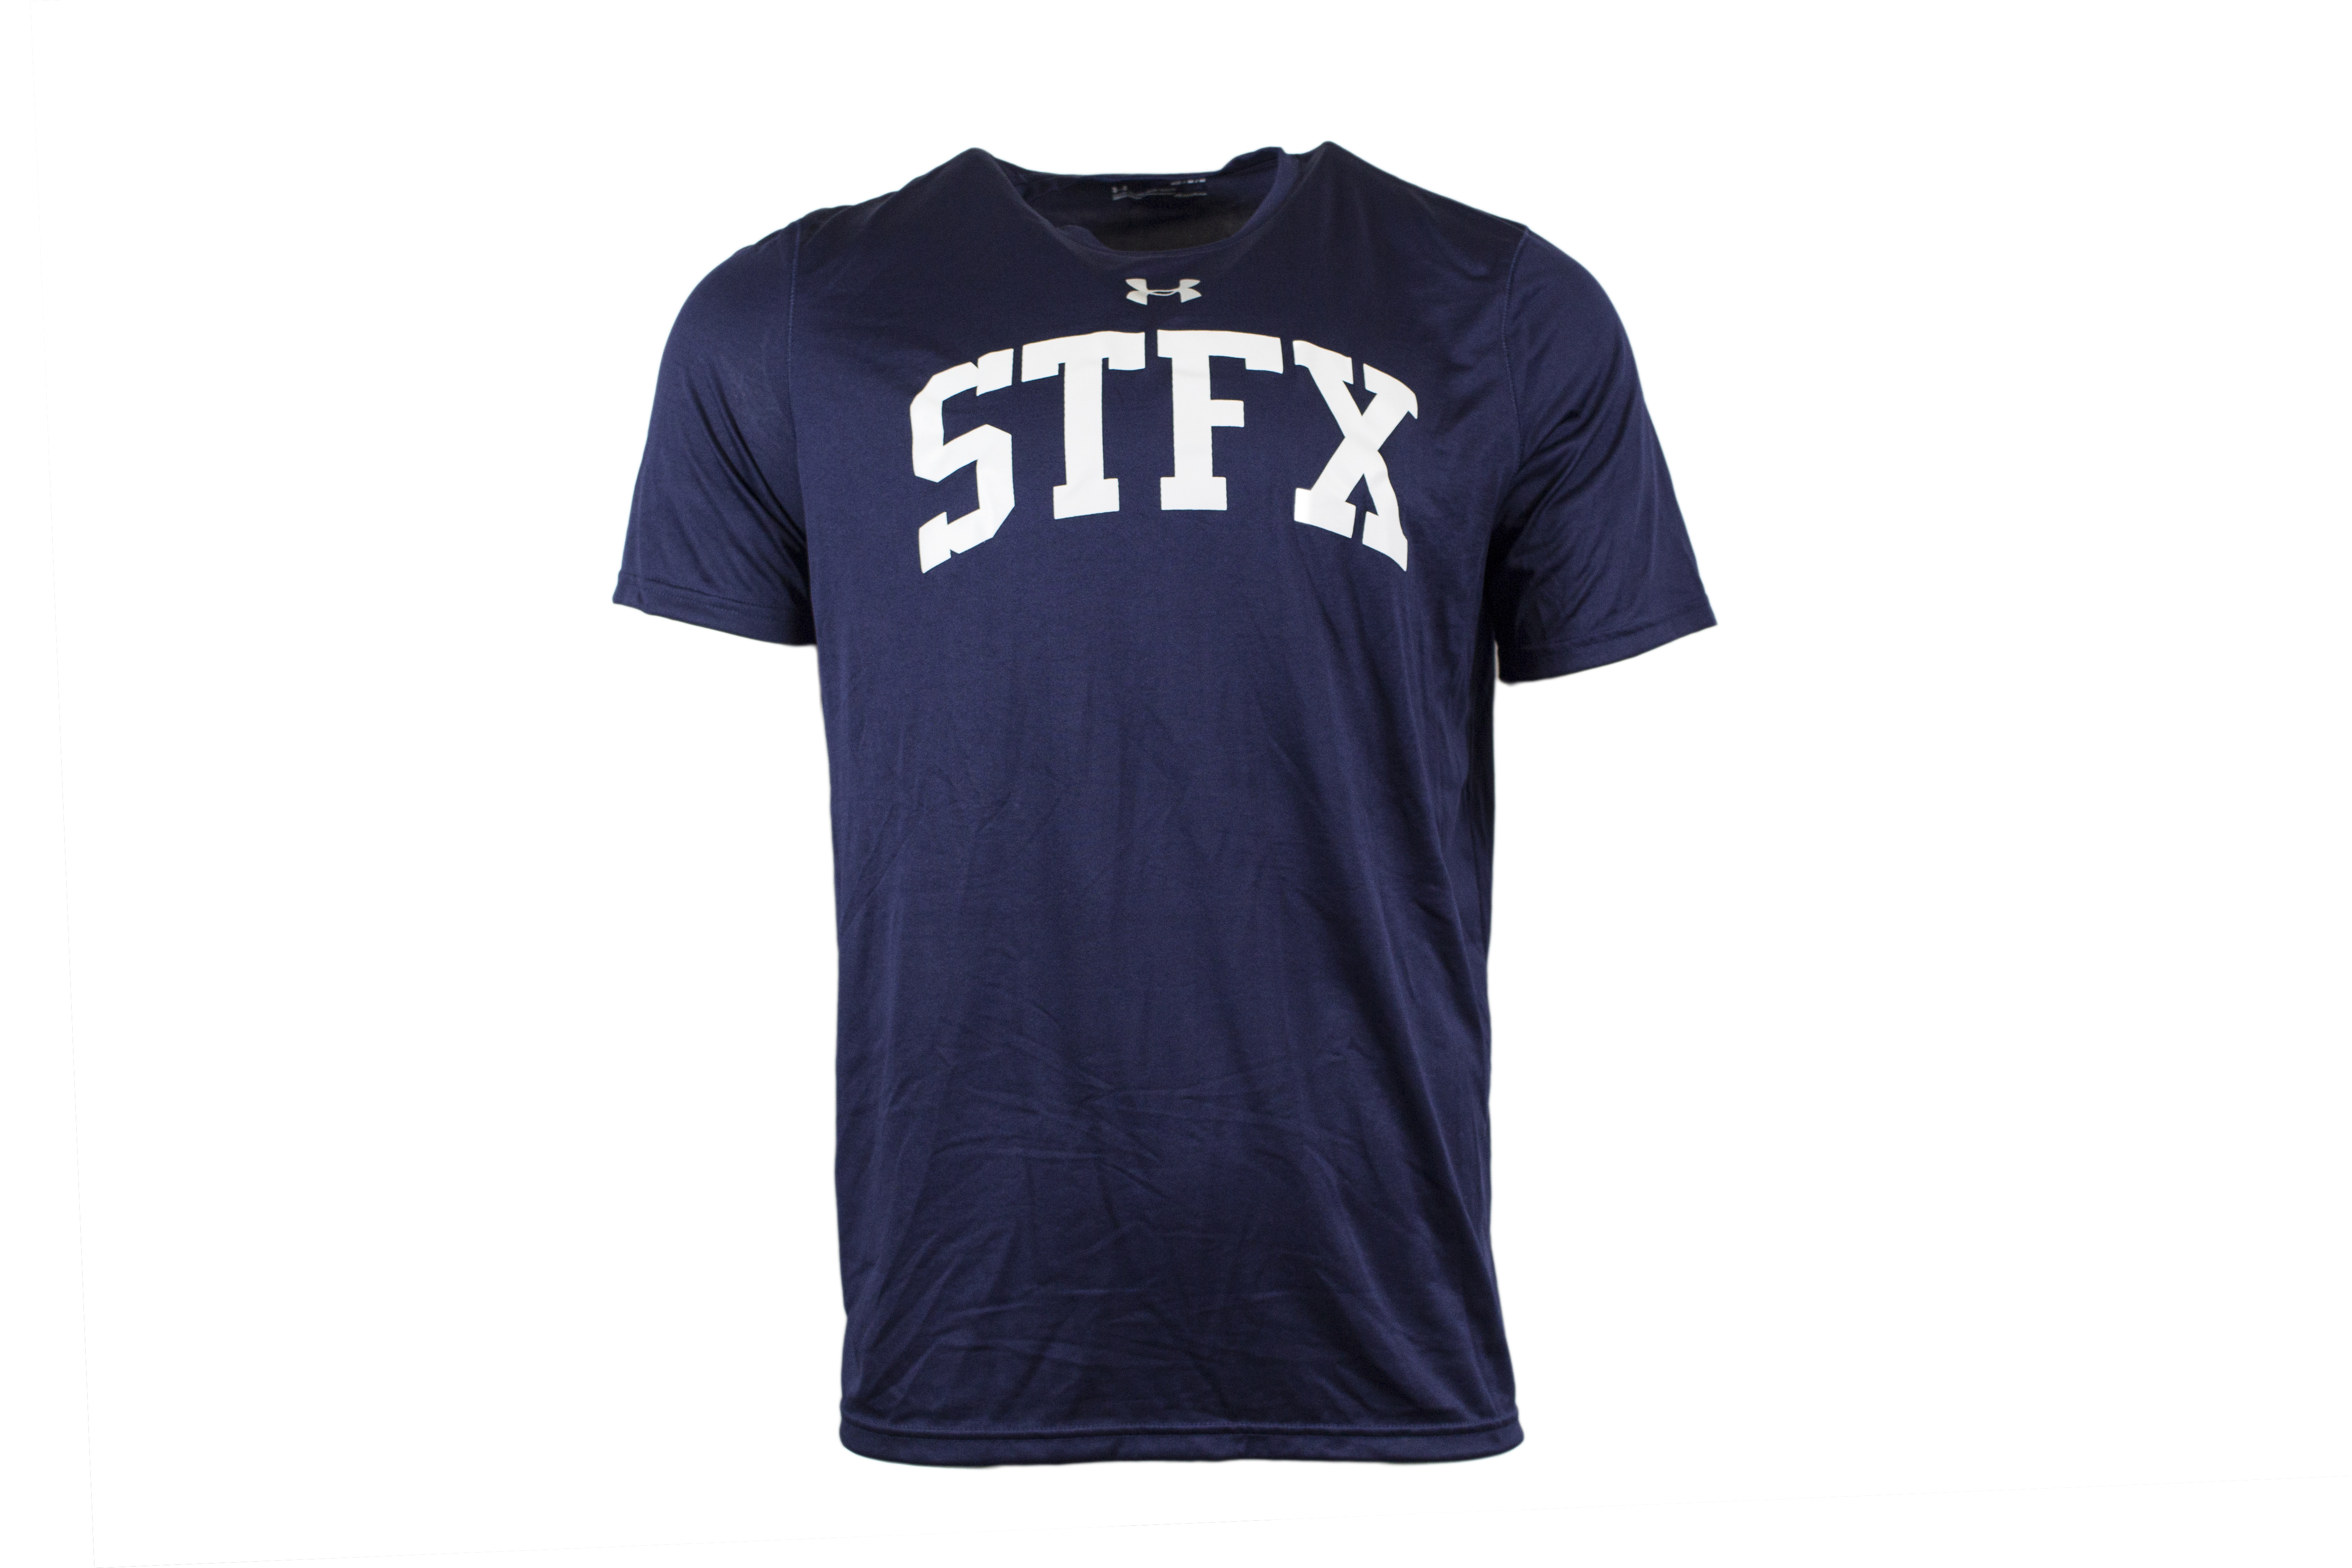 Under Armour StFX Dry Fit Tee – STFX Store